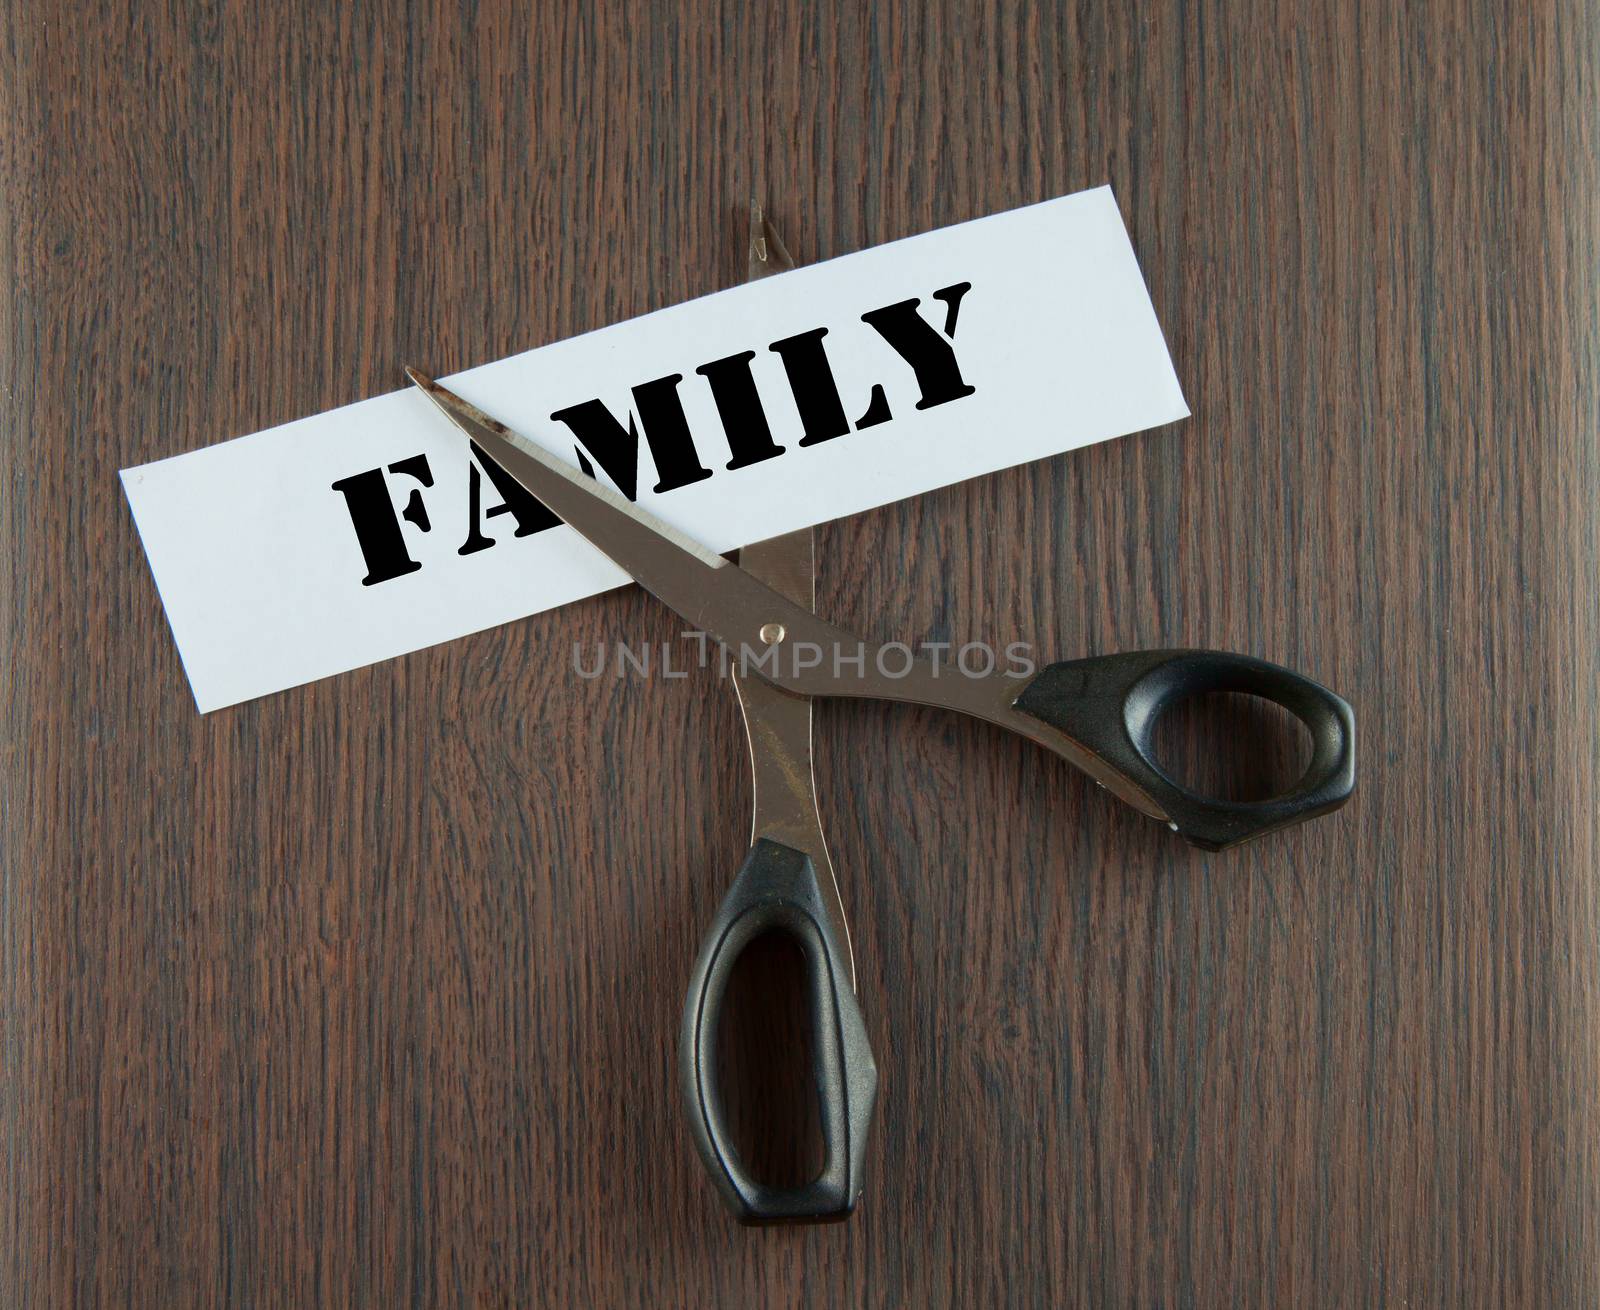 Scissors cutting the word "family" written on a paper strip, over wooden background